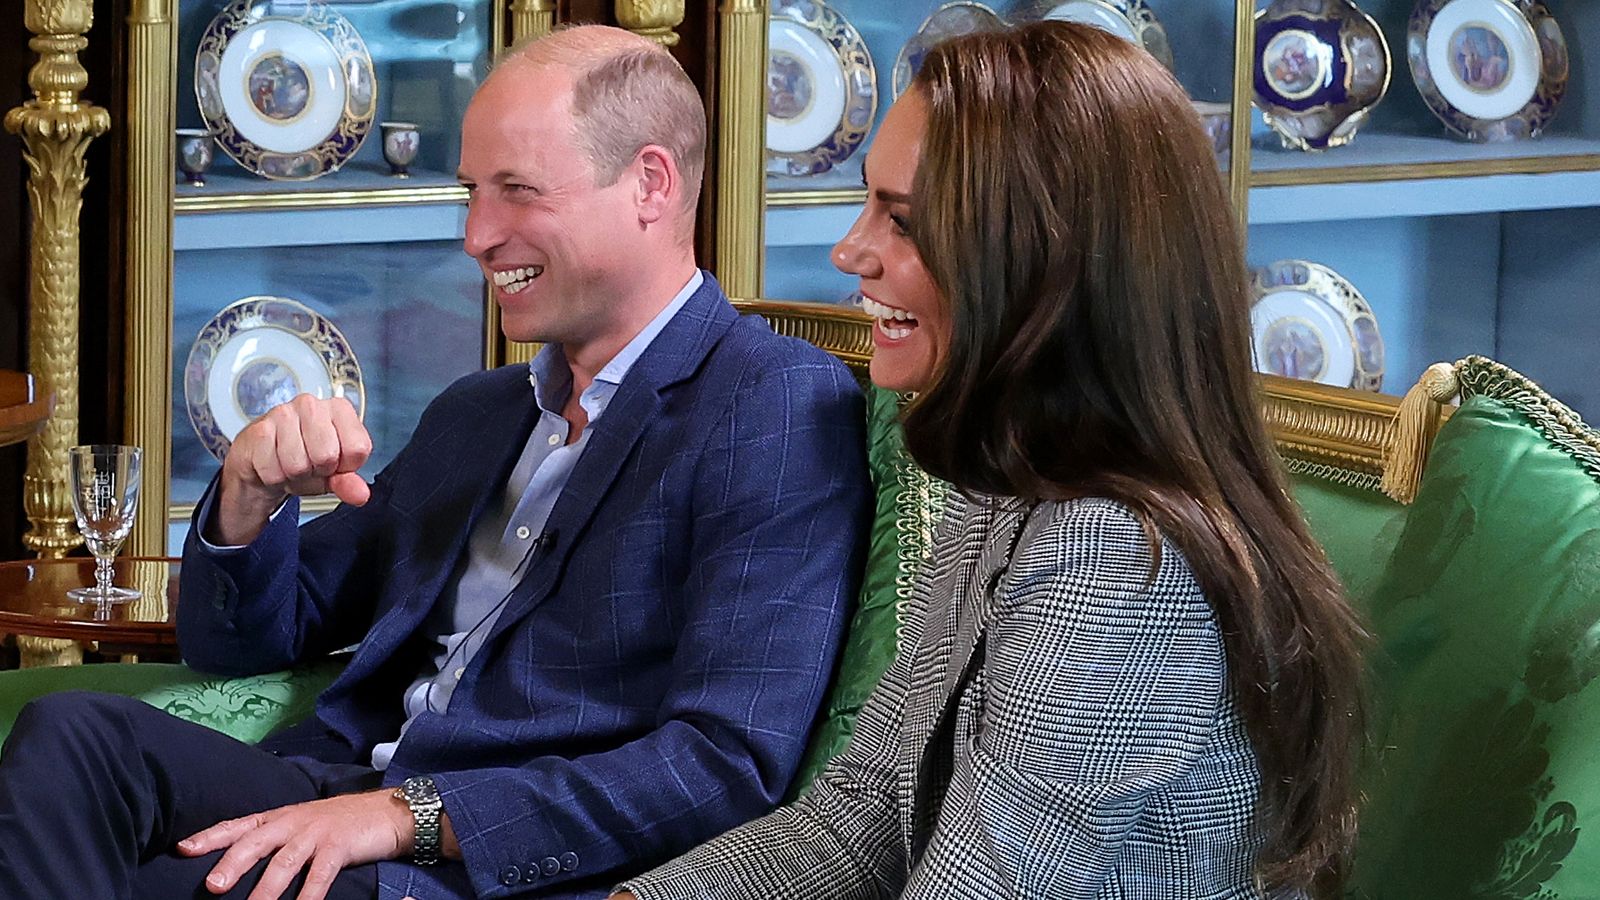 Kate's penchant for drinking game revealed - as she admits being competitive with William